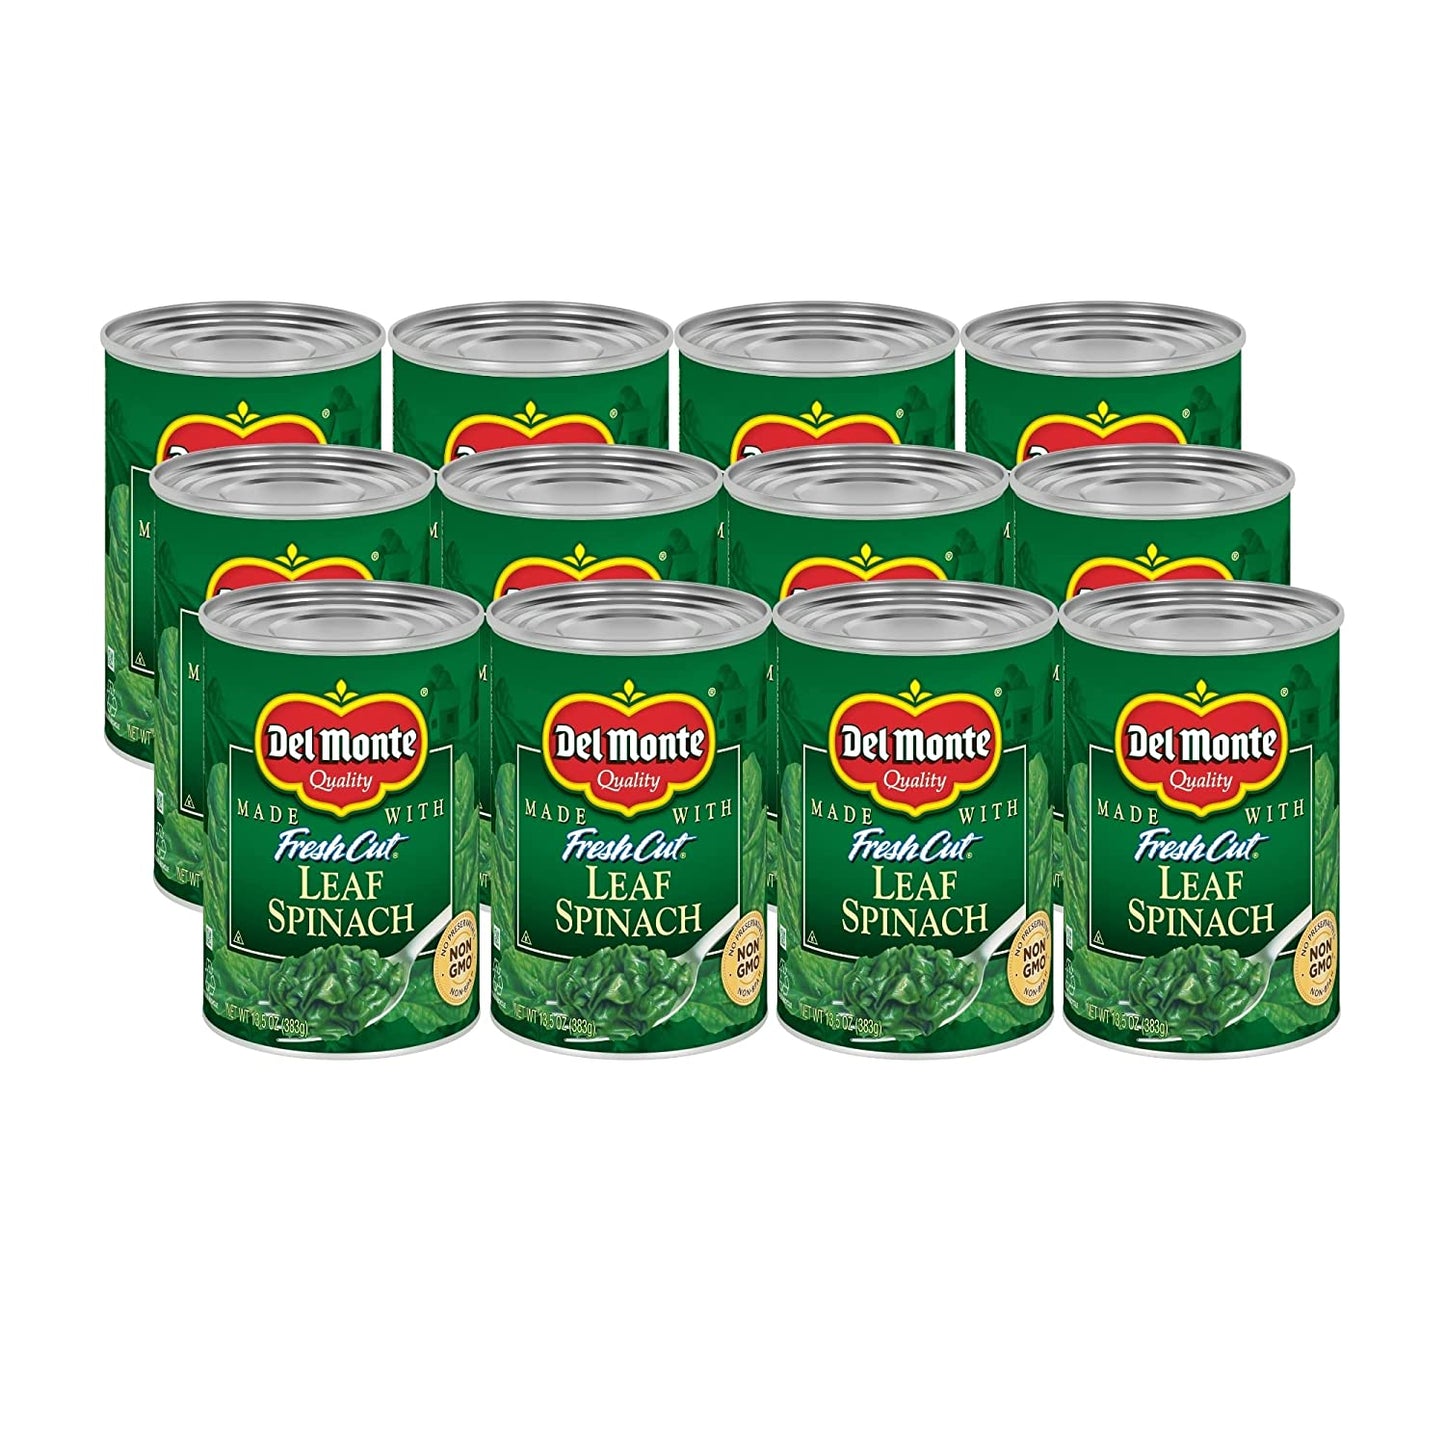 del monte canned fresh cut leaf spinach, 13.5 ounce (pack of 12)